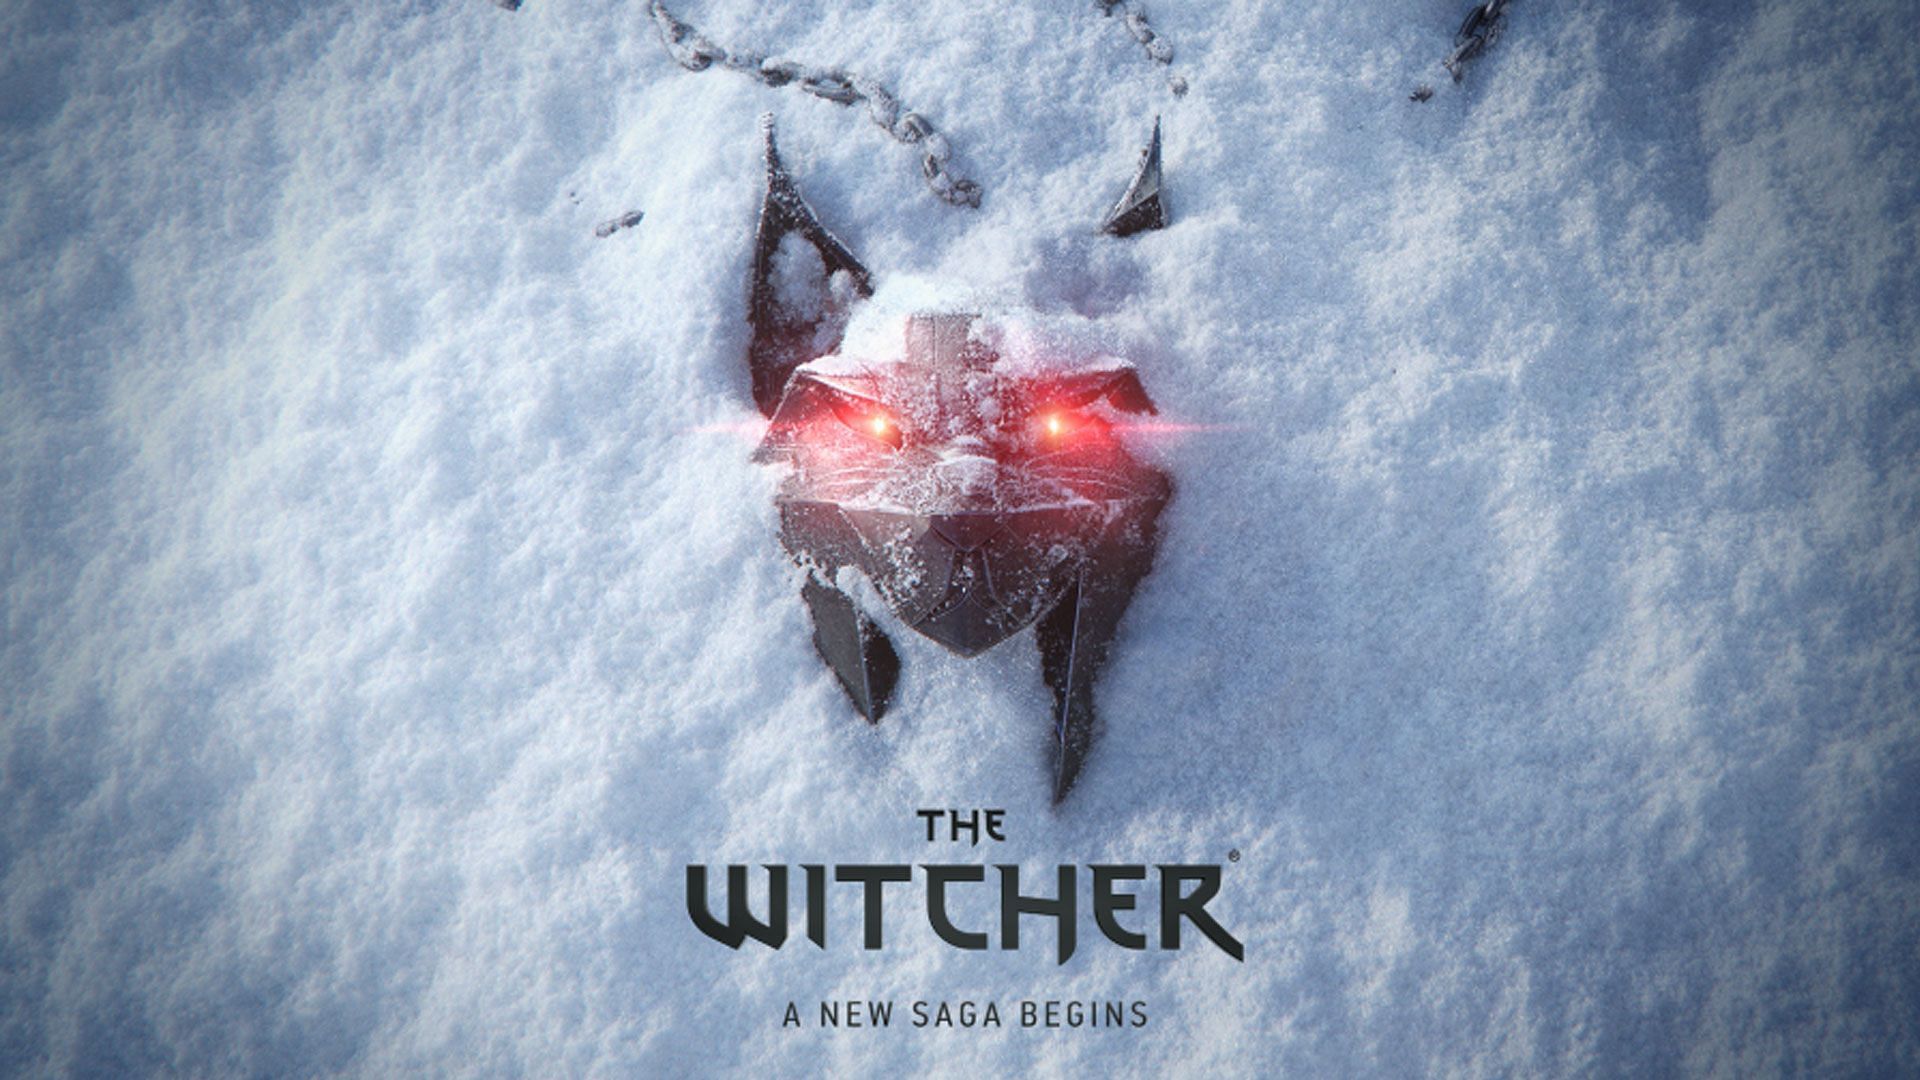 The medallion buried in the snow seems to be that of a lynx (Image via CD Projekt RED)